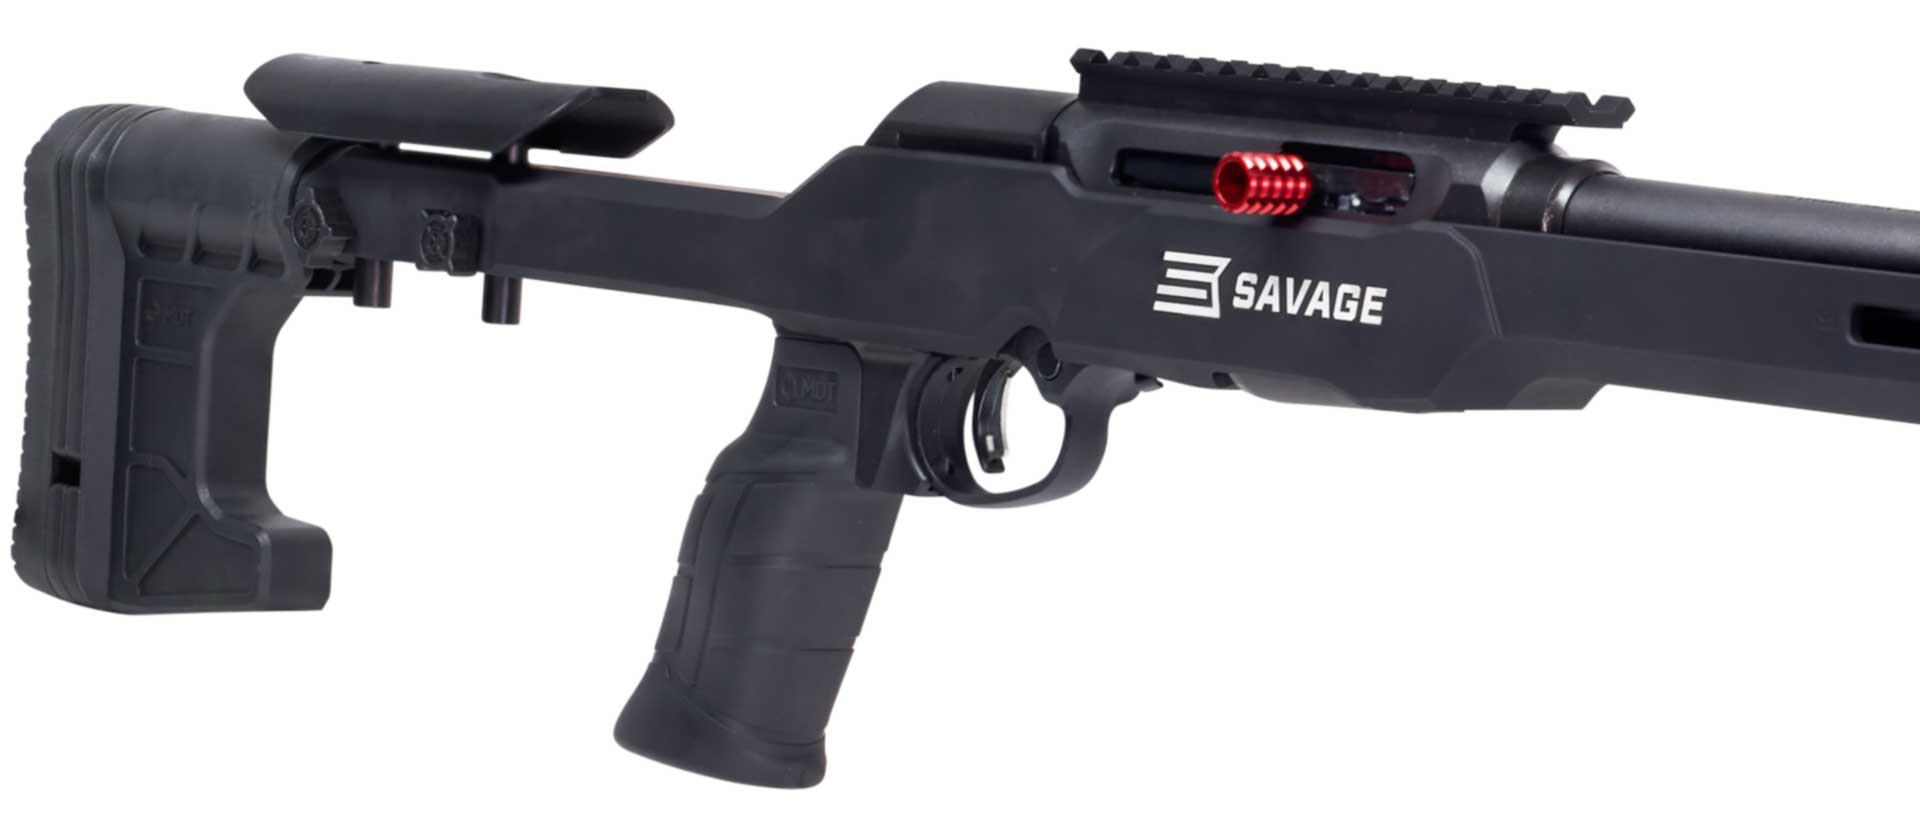 Savage A22 Precision receiver stock chassis MDT gun rifle carbine